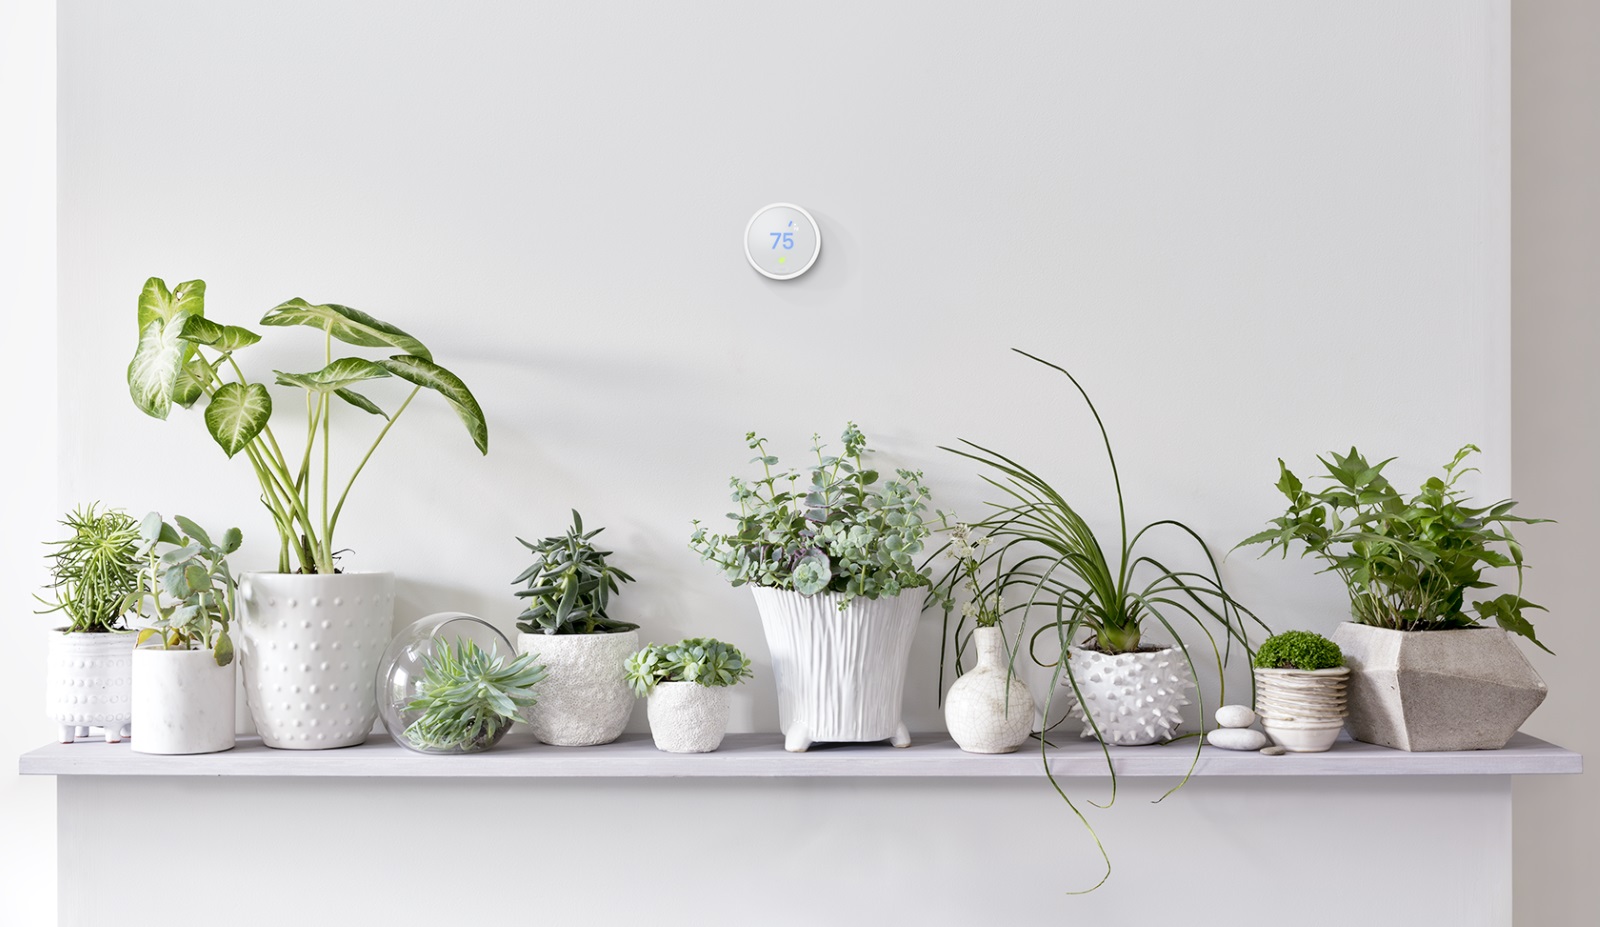 Nest's $169 smart thermostat is all about simplicity